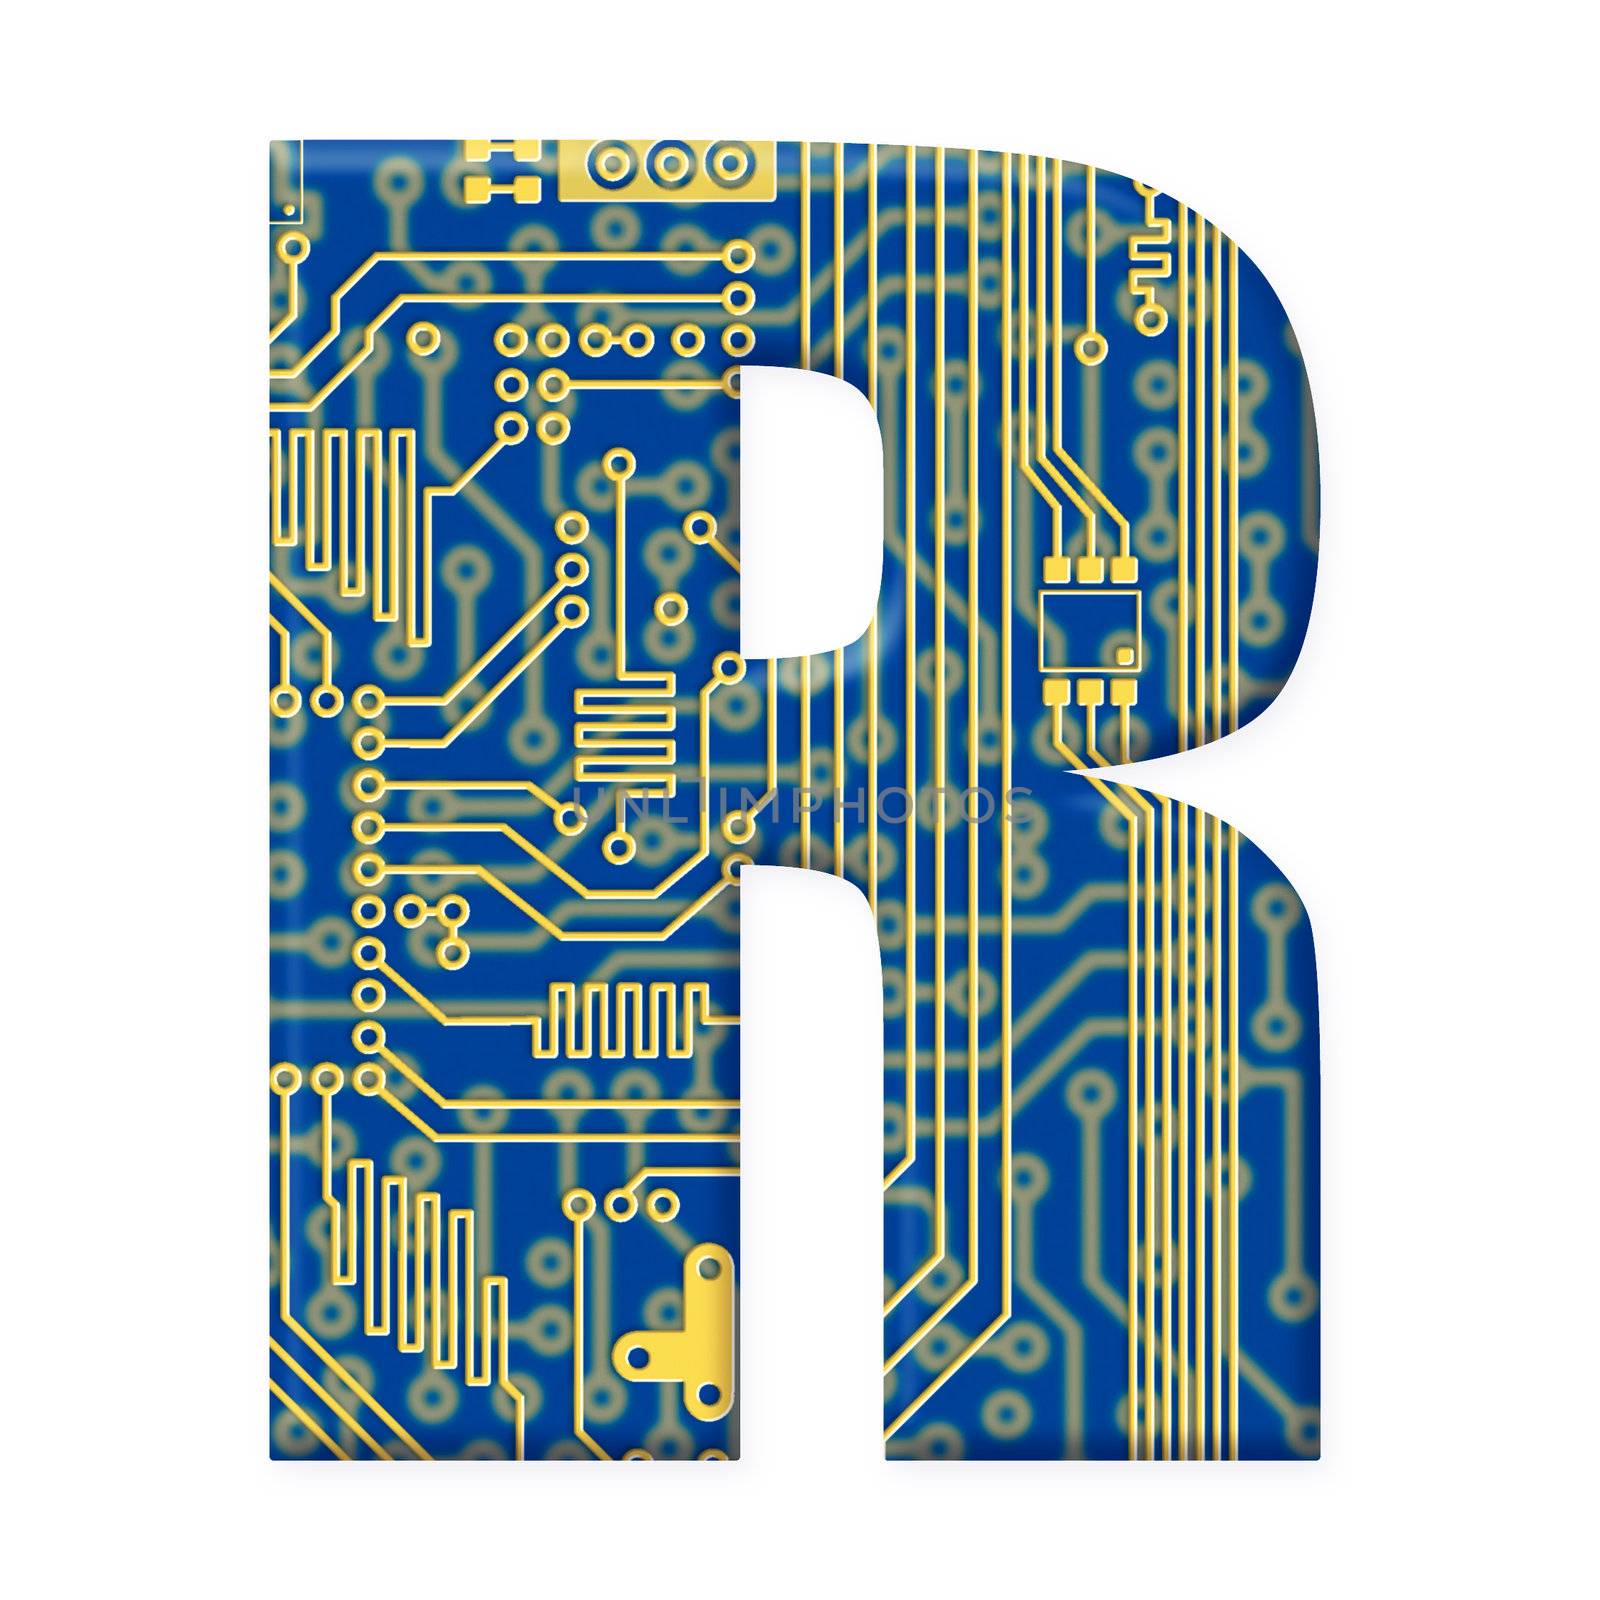 One letter from the electronic technology circuit board alphabet on a white background - R